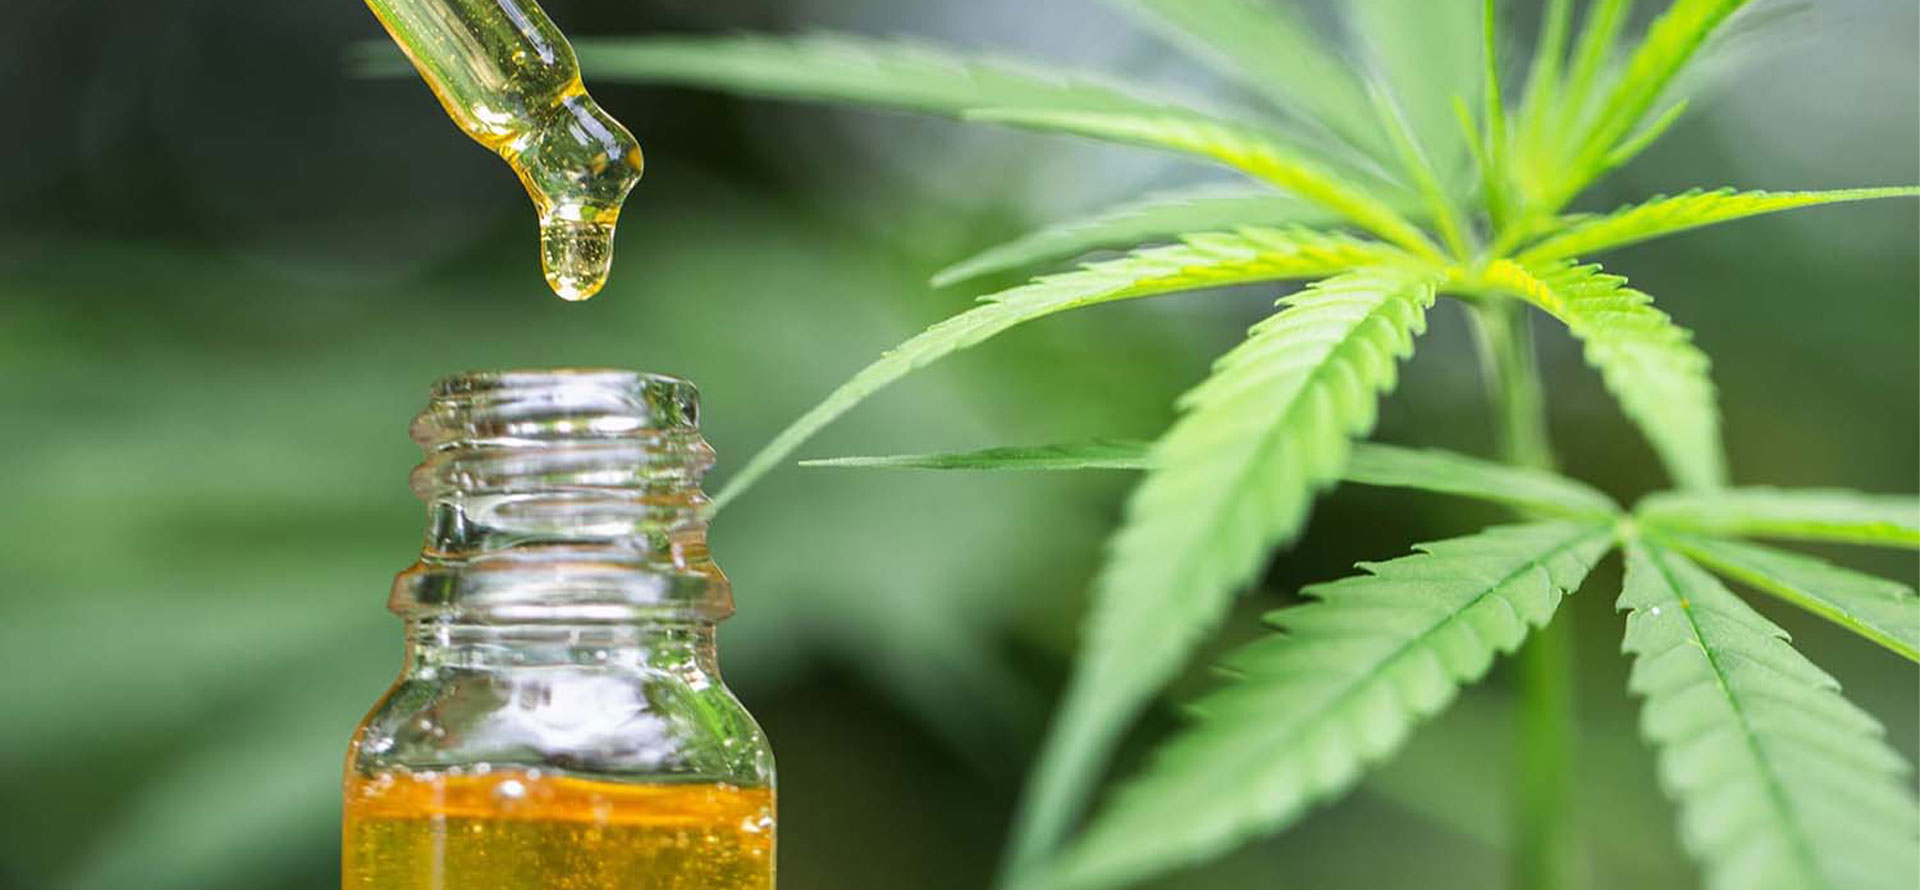 CBC COCUNT OIL - Cbd|Oil|Benefits|Cbc|Effects|Pain|Study|Health|Thc|Products|Cannabinoids|Studies|Research|Anxiety|Cannabis|Symptoms|Evidence|People|System|Disease|Treatment|Inflammation|Hemp|Body|Receptors|Disorders|Brain|Plant|Cells|Side|Effect|Blood|Patients|Cancer|Product|Skin|Marijuana|Properties|Cannabidiol|Cannabinoid|Cbd Oil|Cbd Products|Cbc Oil|Side Effects|Endocannabinoid System|Chronic Pain|Multiple Sclerosis|Pain Relief|Cannabis Plant|Cbd Oil Benefits|Blood Pressure|Health Benefits|High Blood Pressure|Anti-Inflammatory Properties|Neuropathic Pain|Animal Studies|Hemp Plant|Hemp Oil|Anxiety Disorders|Cbd Product|Immune System|Clinical Trials|Cbd Gummies|Nerve Cells|Nervous System|Entourage Effect|Hemp Seed Oil|United States|Cbd Oils|Drug Administration